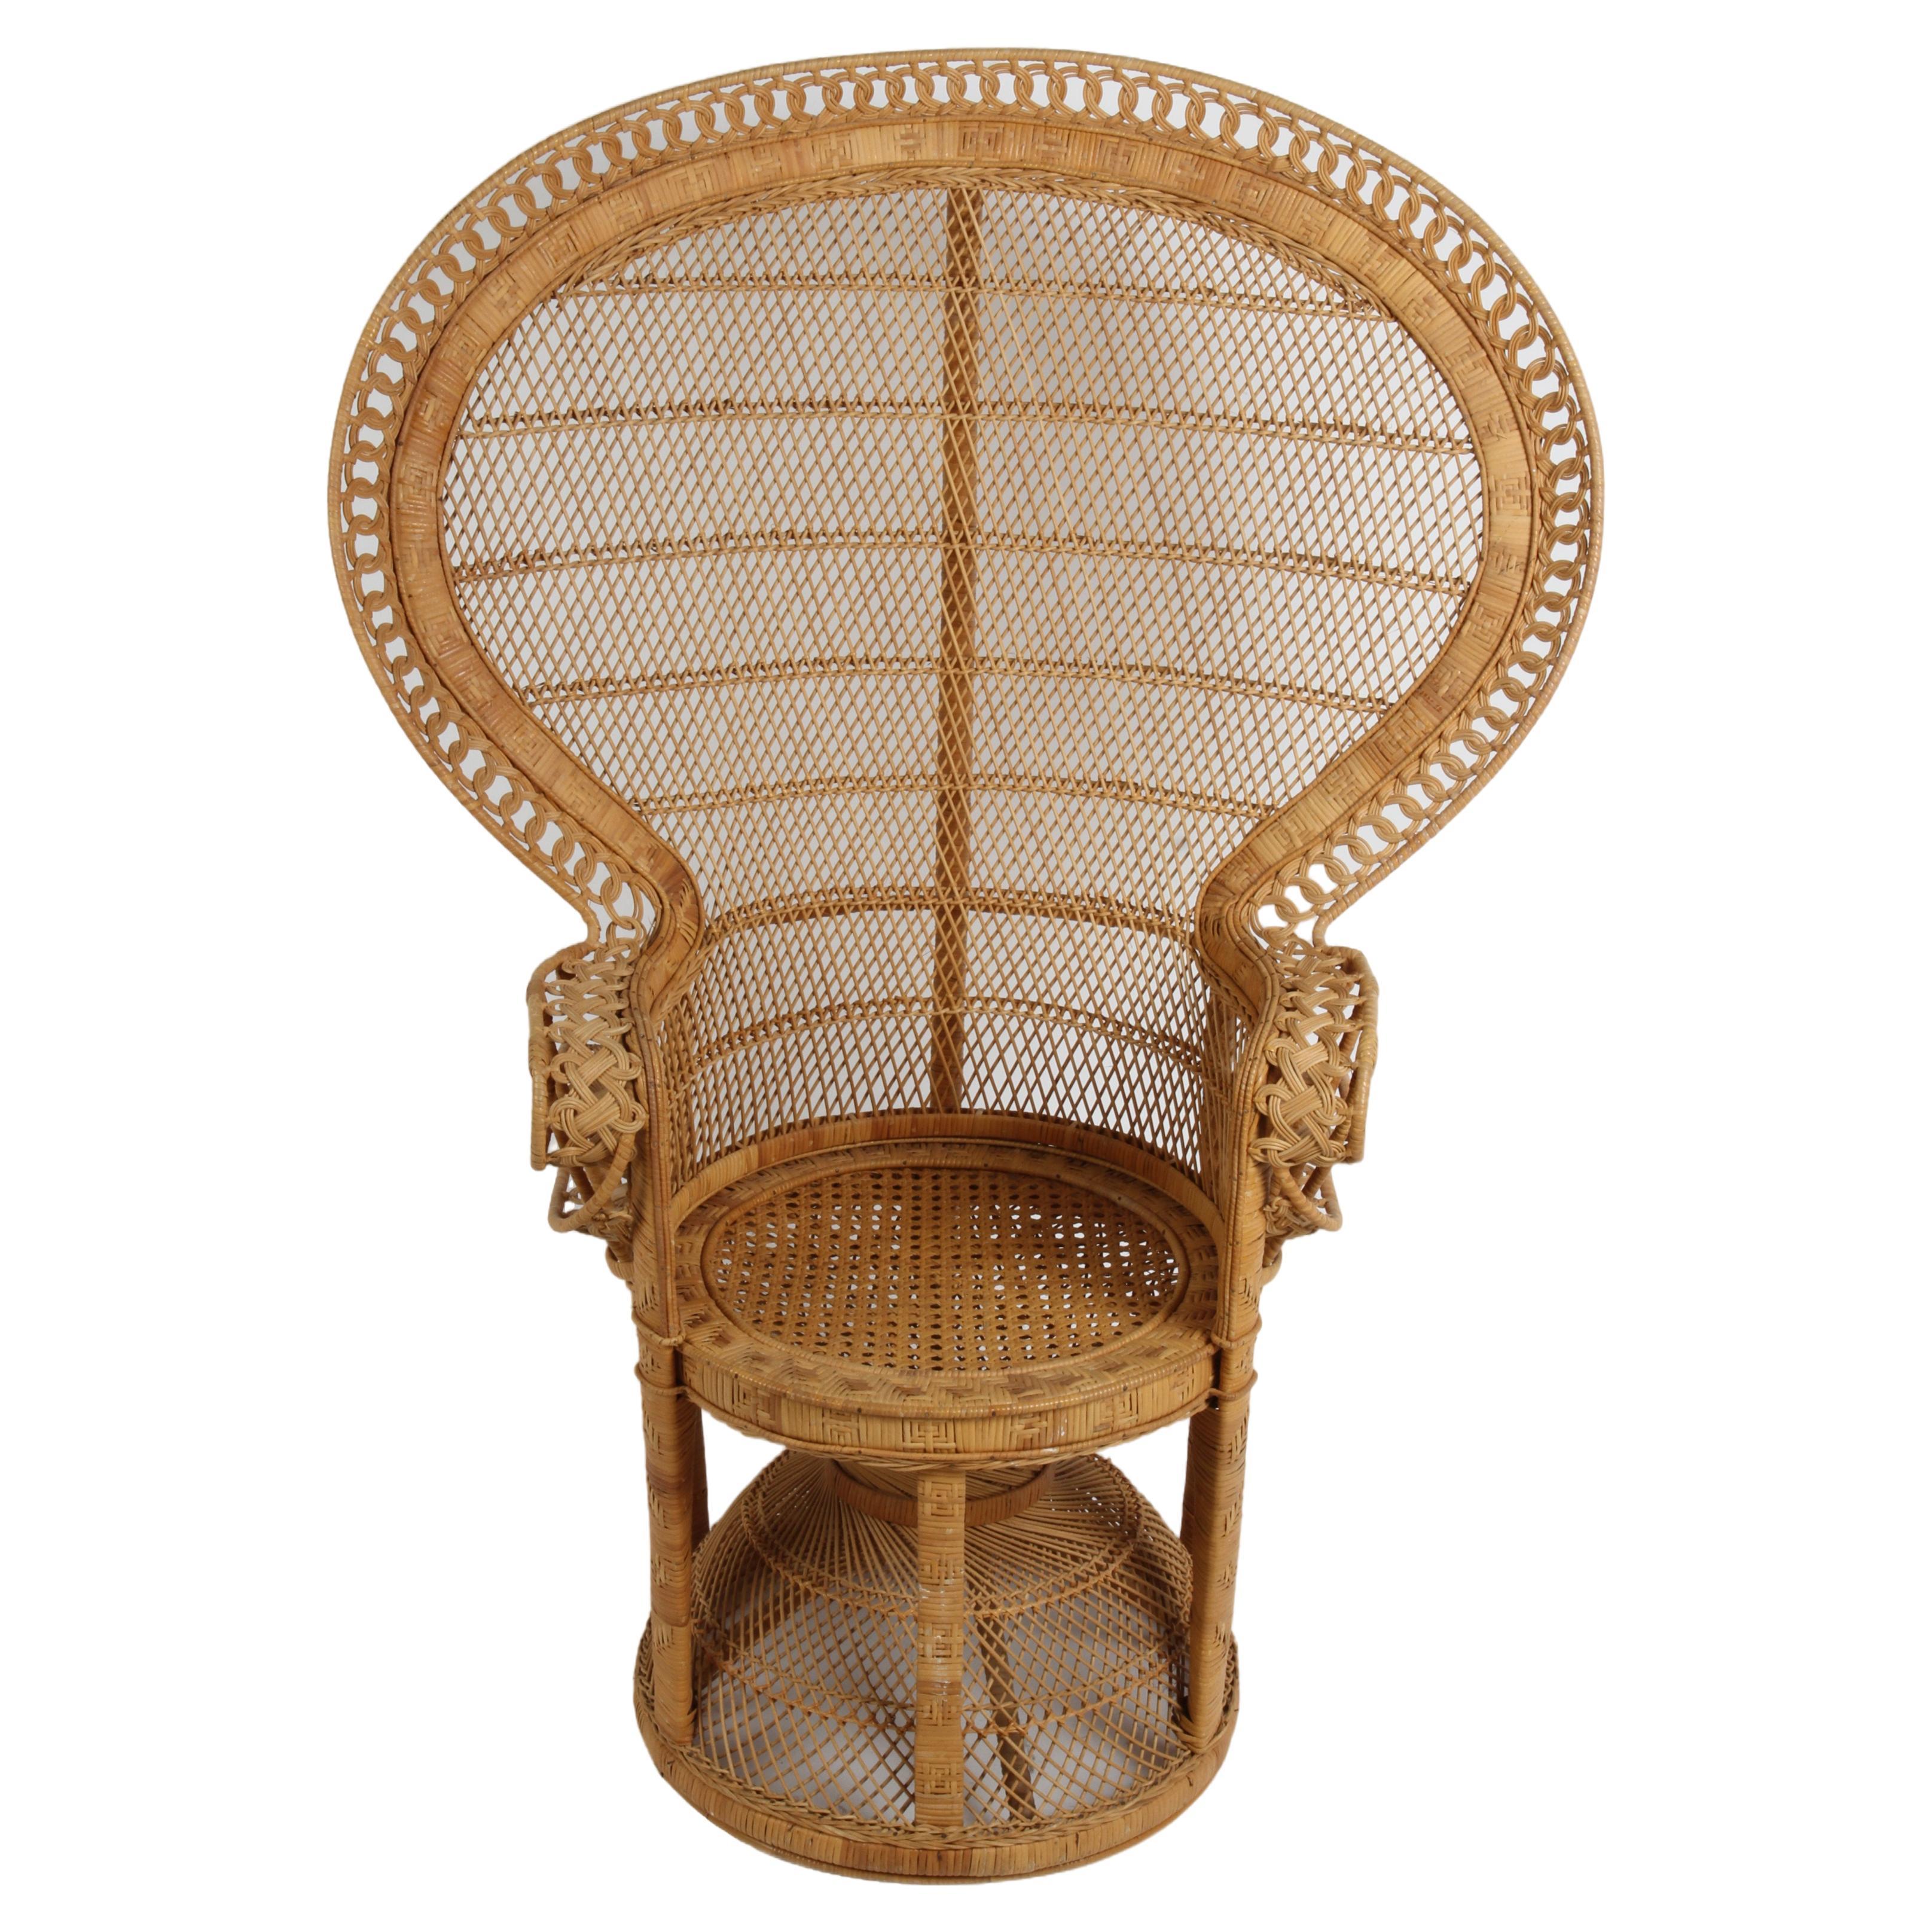 Vintage 1970s Rattan & Wicker Handcrafted Boho Chic Emmanuelle Peacock Chair